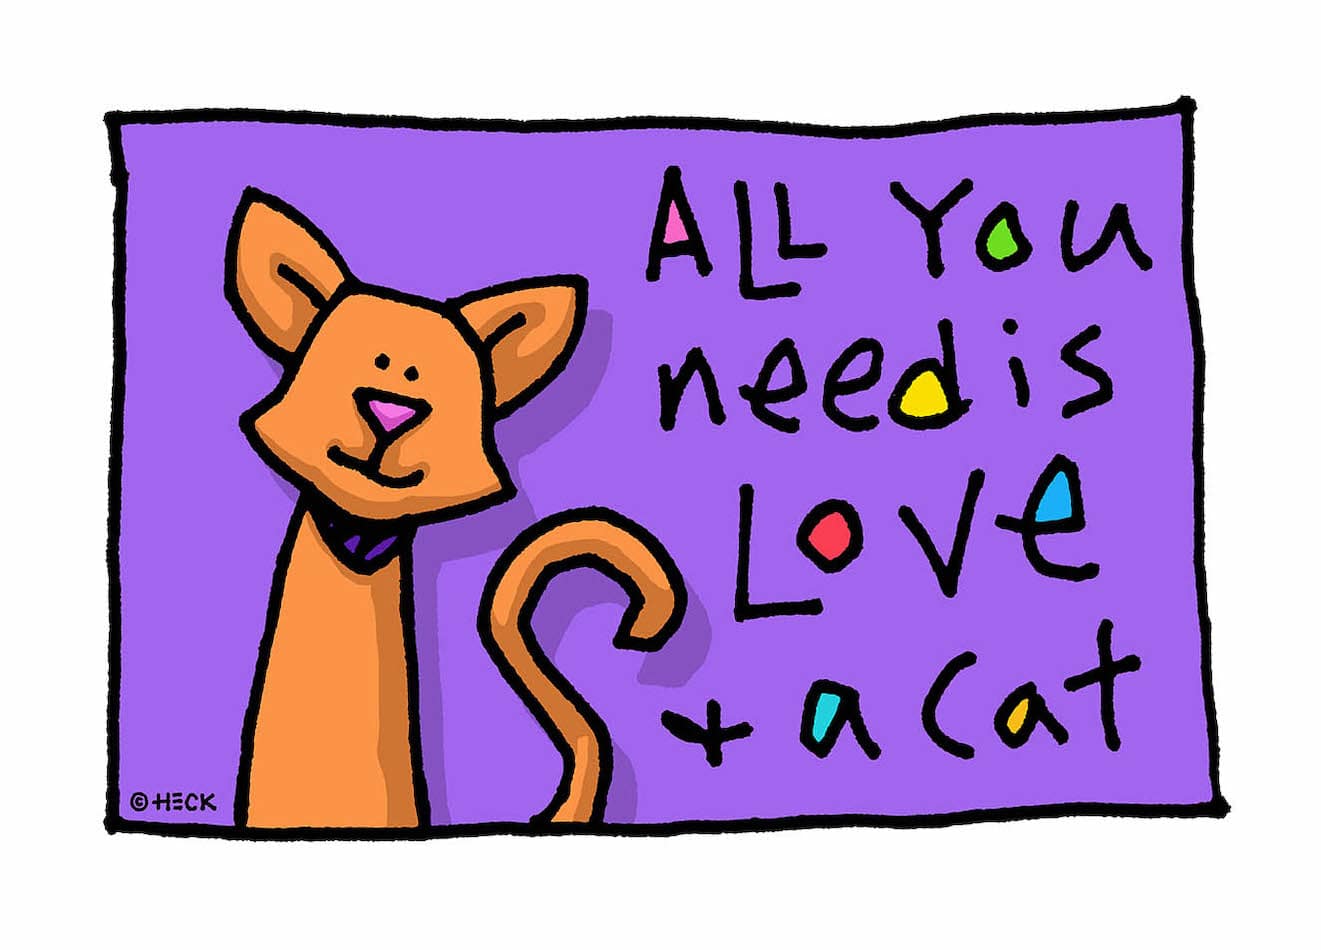 ed-heck-all-you-need-is-love-and-a-cat-jpg